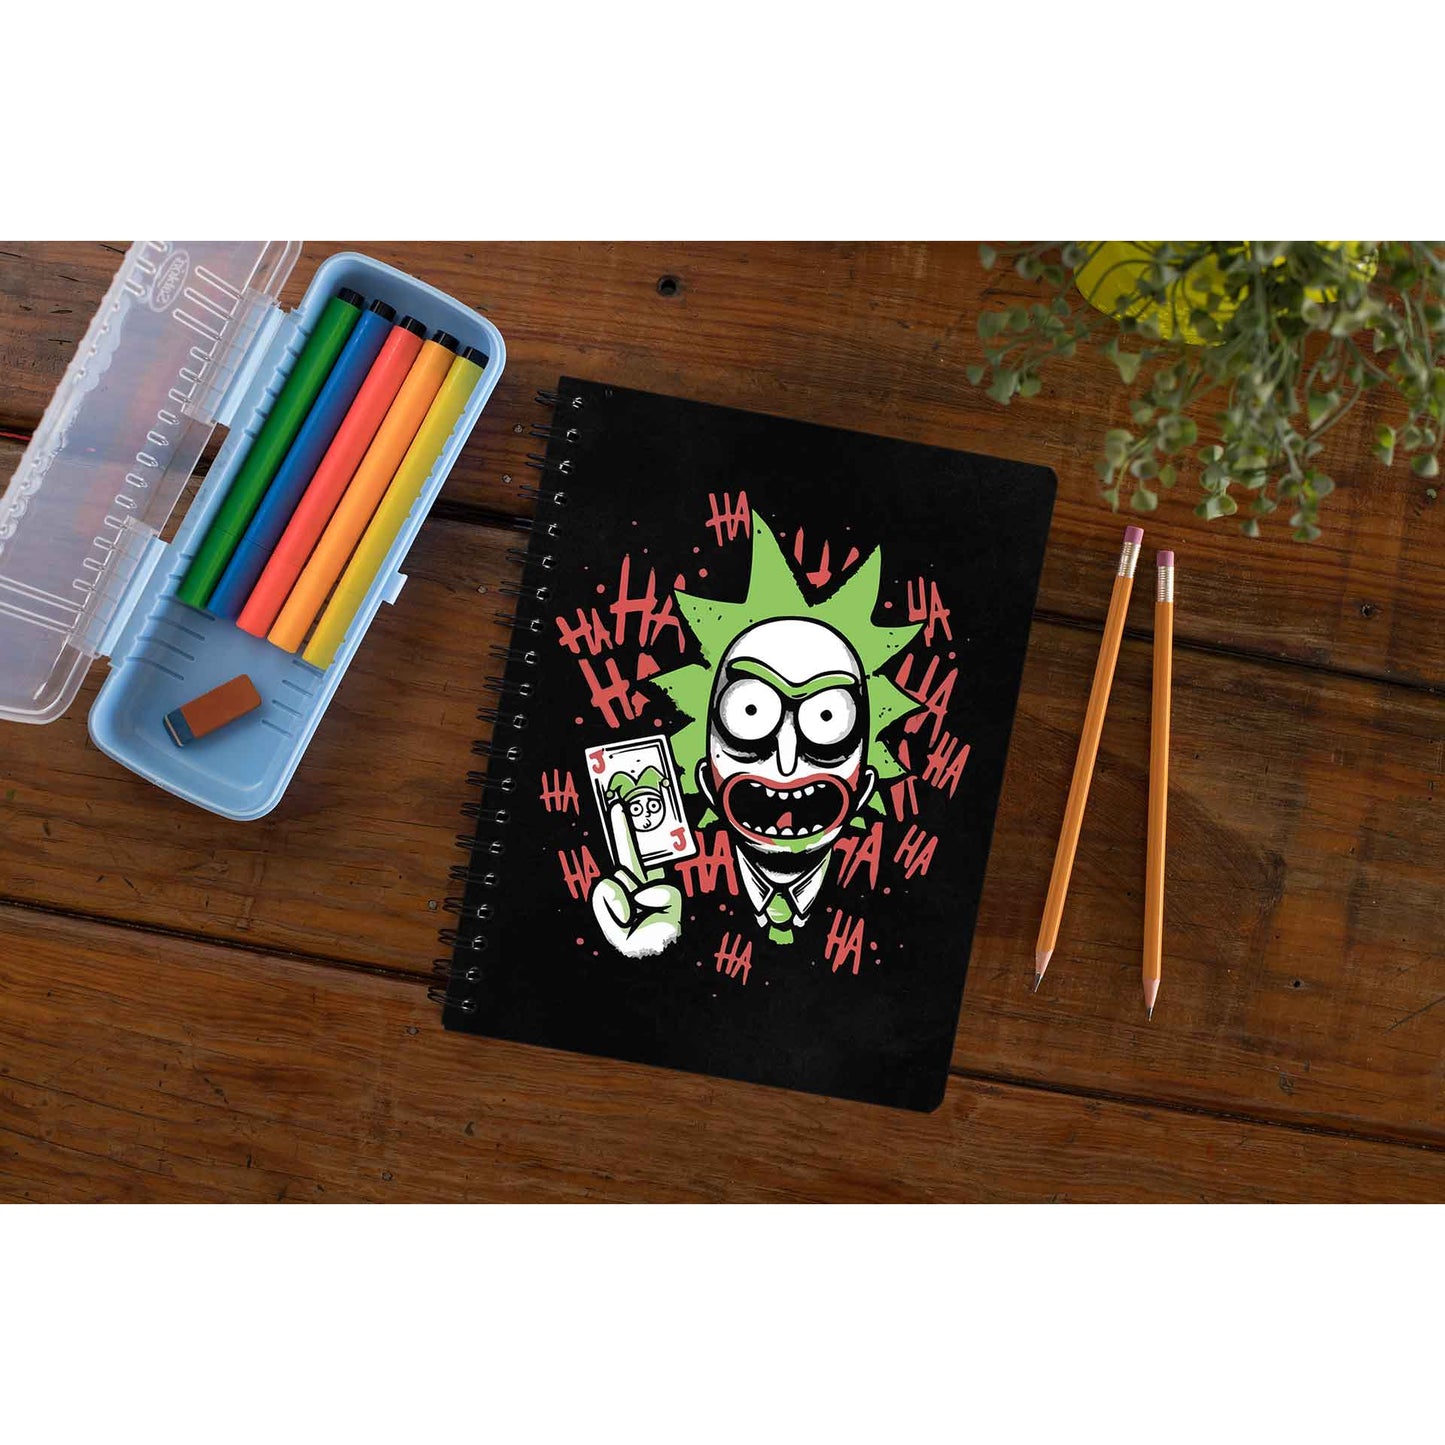 rick and morty joker notebook notepad diary buy online united states of america usa the banyan tee tbt unruled rick and morty online summer beth mr meeseeks jerry quote vector art clothing accessories merchandise